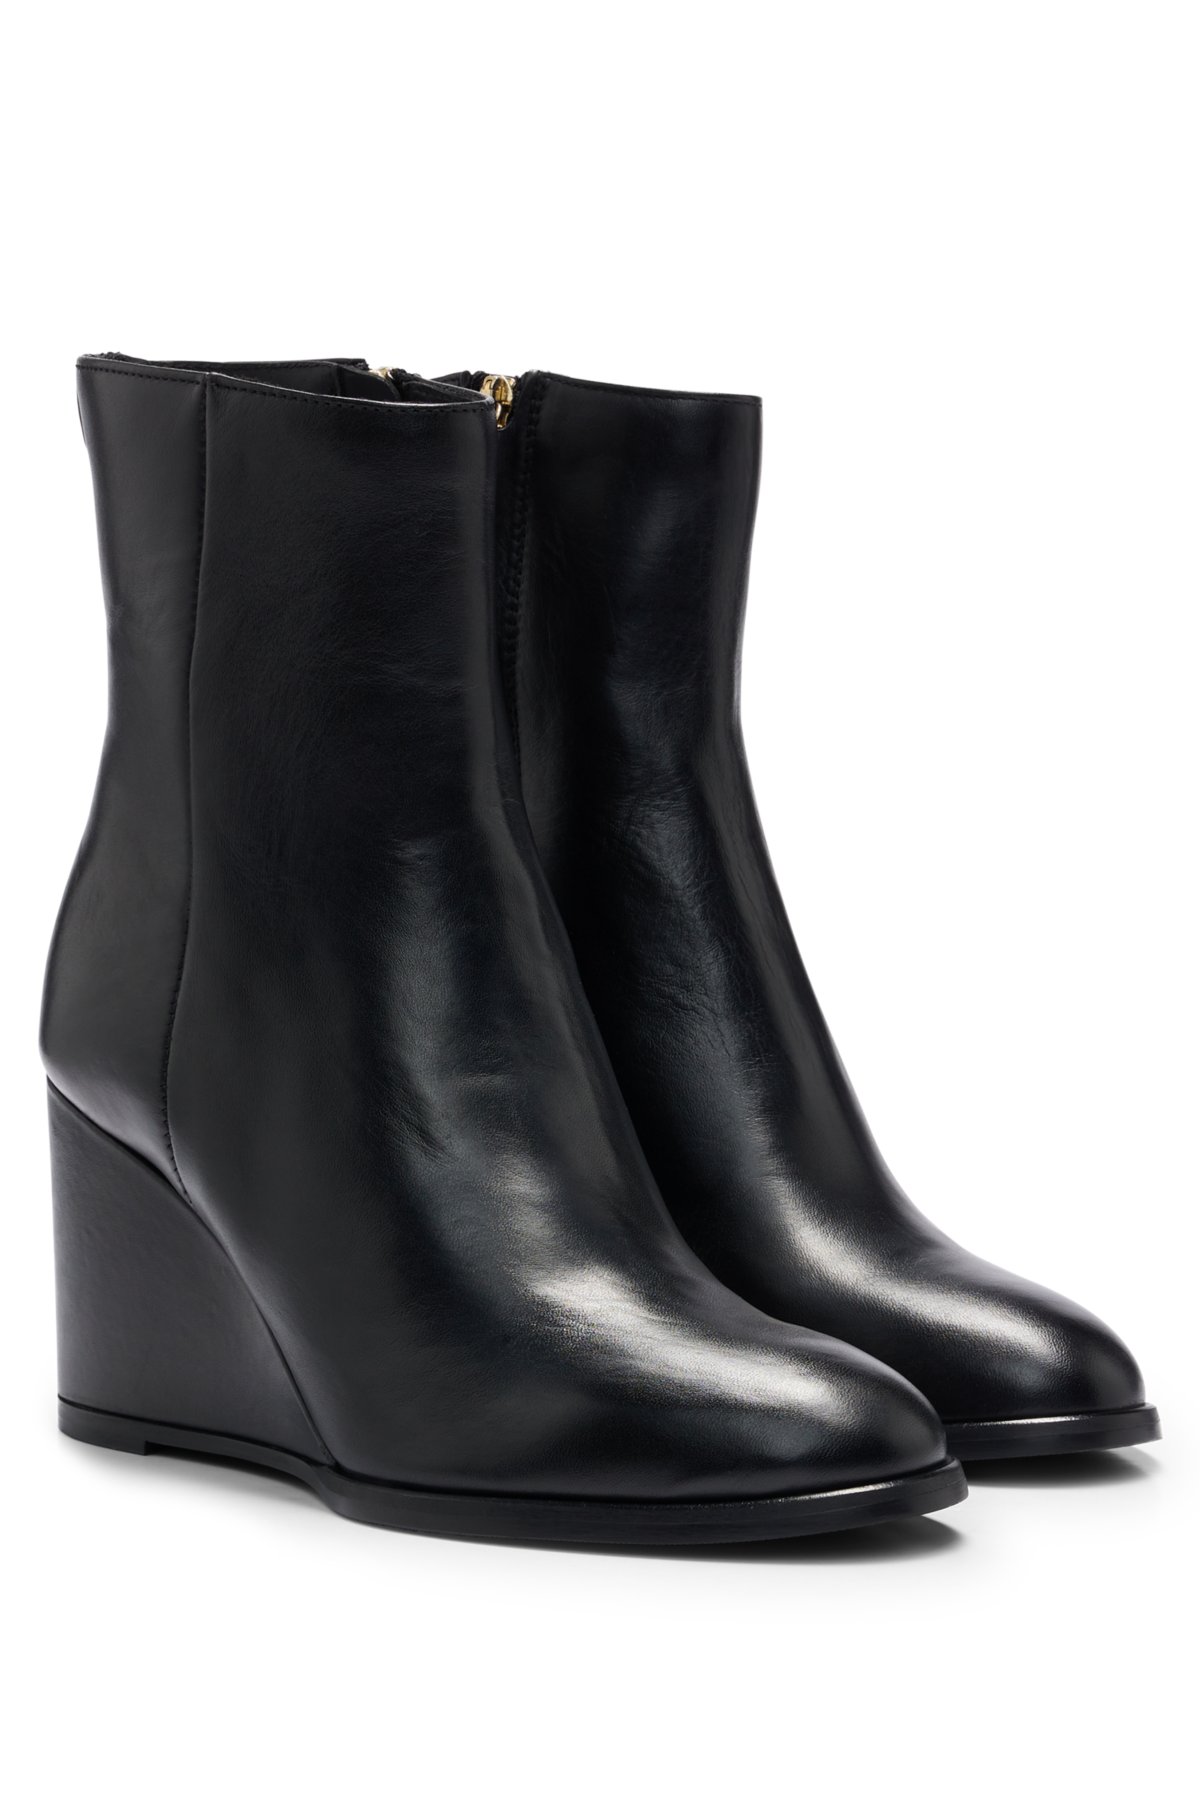 Certifikat græsplæne aborre BOSS - Italian-made ankle boots in leather with wedge heel